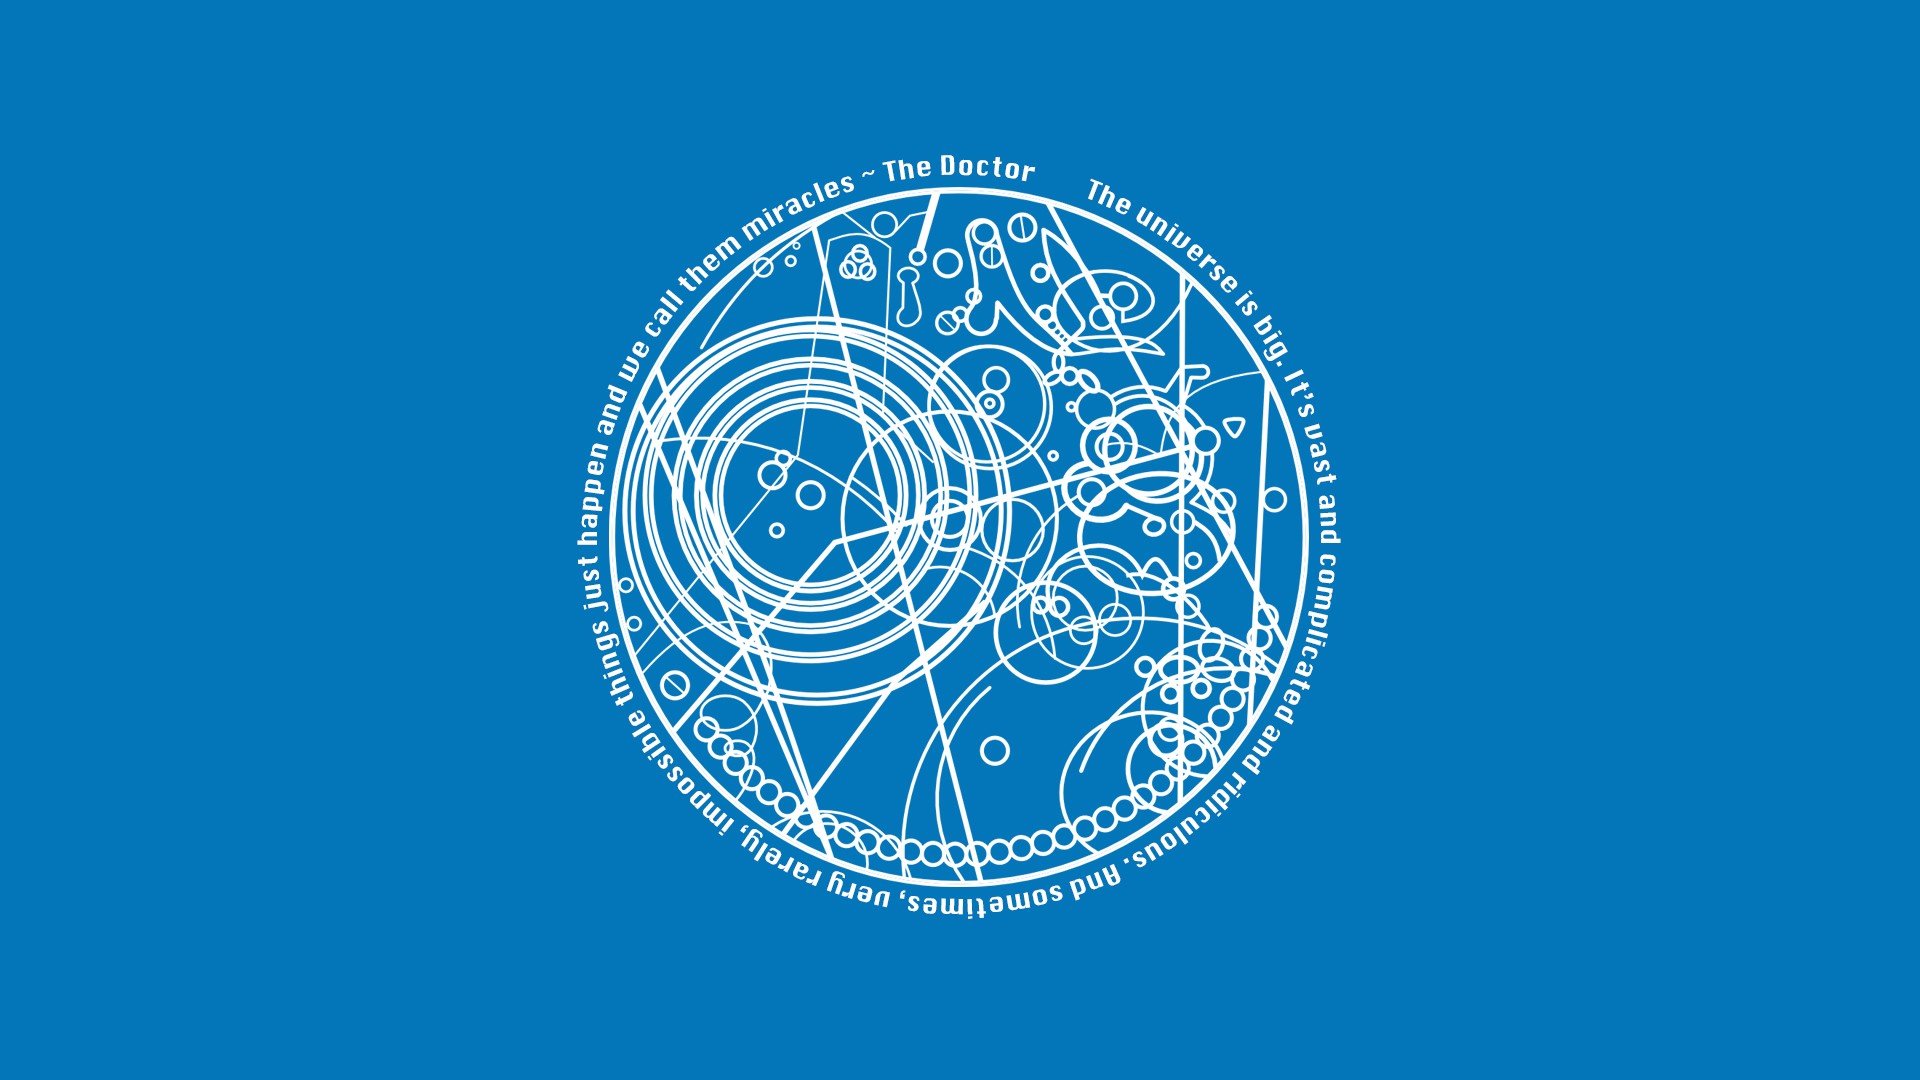 Magic Circle Doctor Who Blue Background 1920x1080